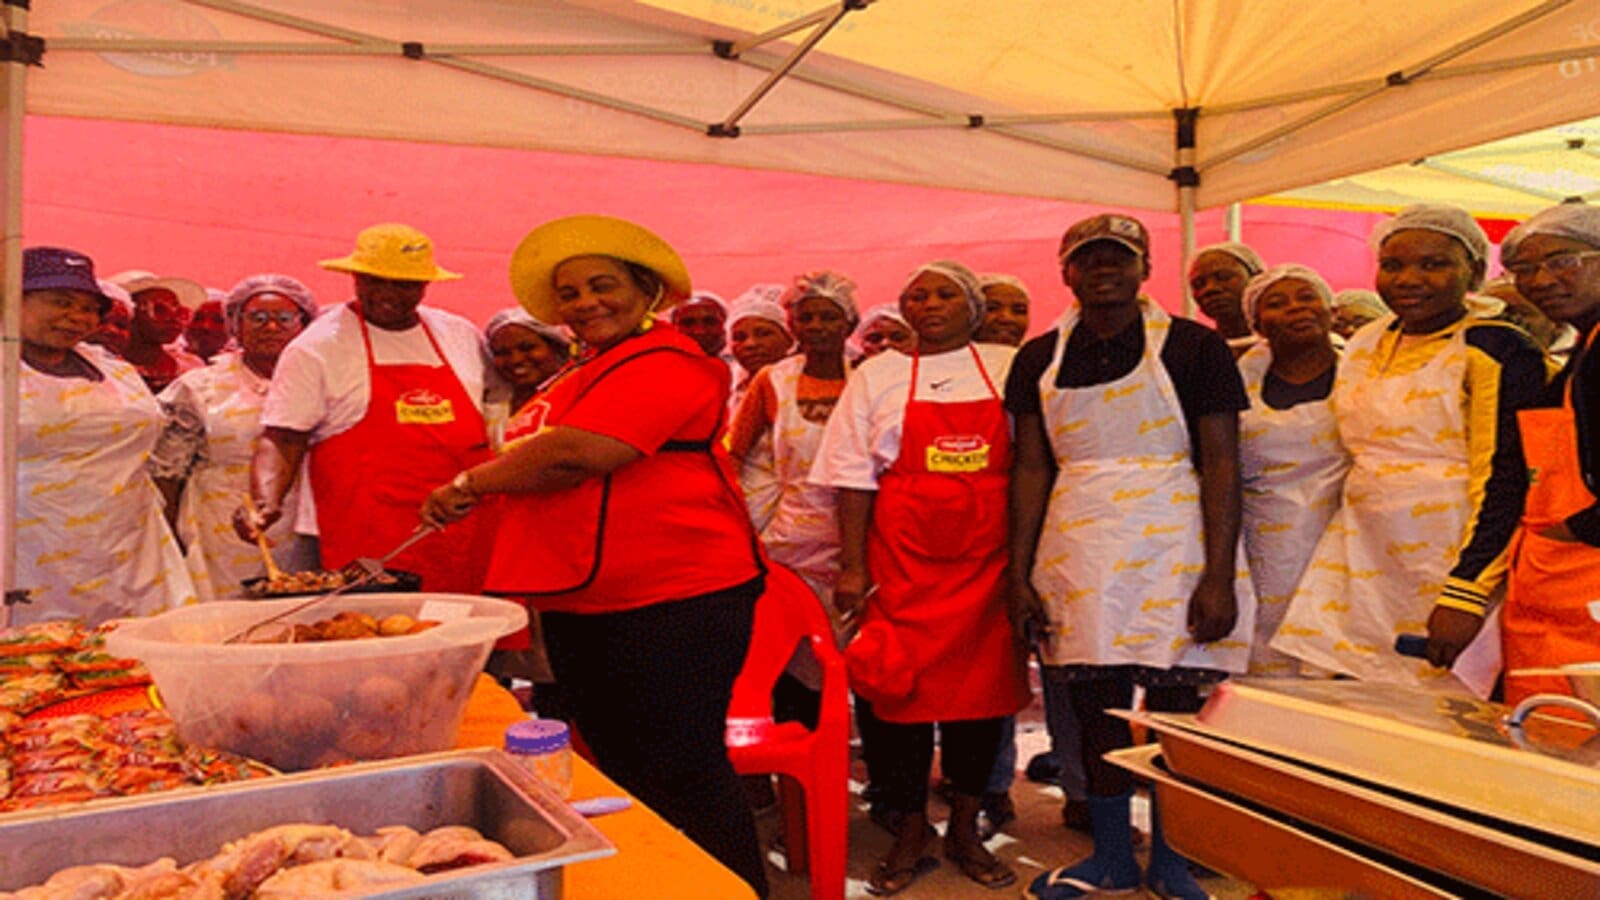 Namib Mills gives back to society through training informal business owners